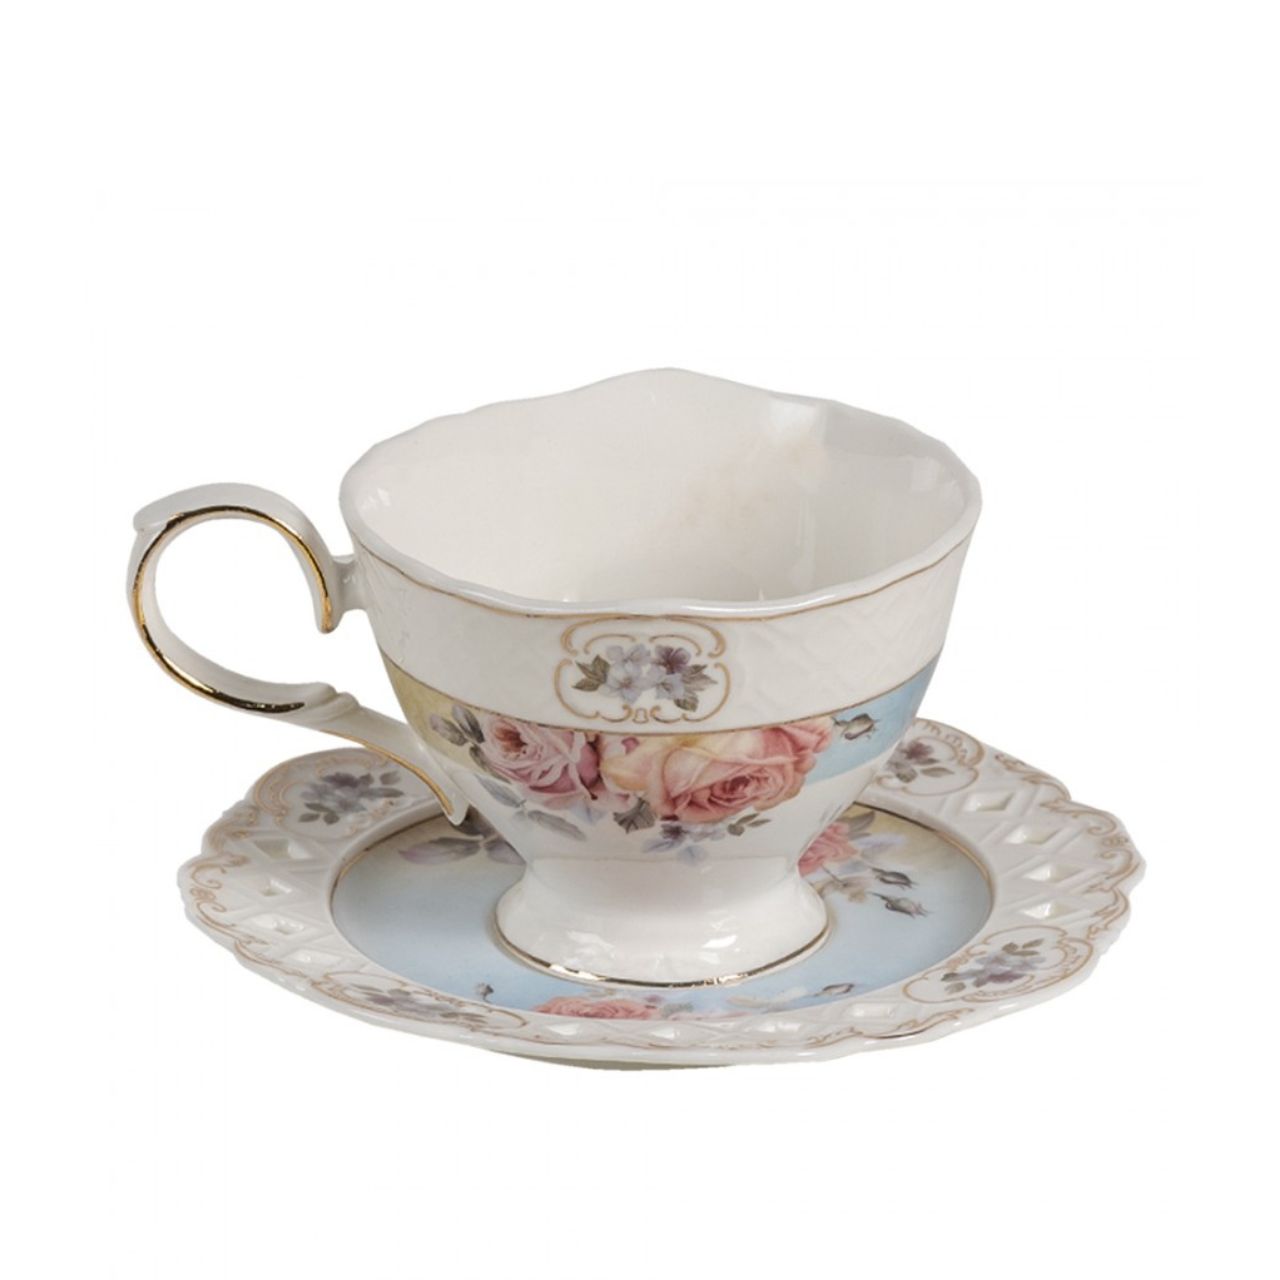 An elegant high-tea or simply a tea lover? Your tea will taste even better with our cups and saucers! Our cups come in the most unique designs; covered with antique, vintage, or cute prints. But we also have plain cups and saucers with a stylish design for those who don’t like prints that much. Great for a cup of cappuccino!